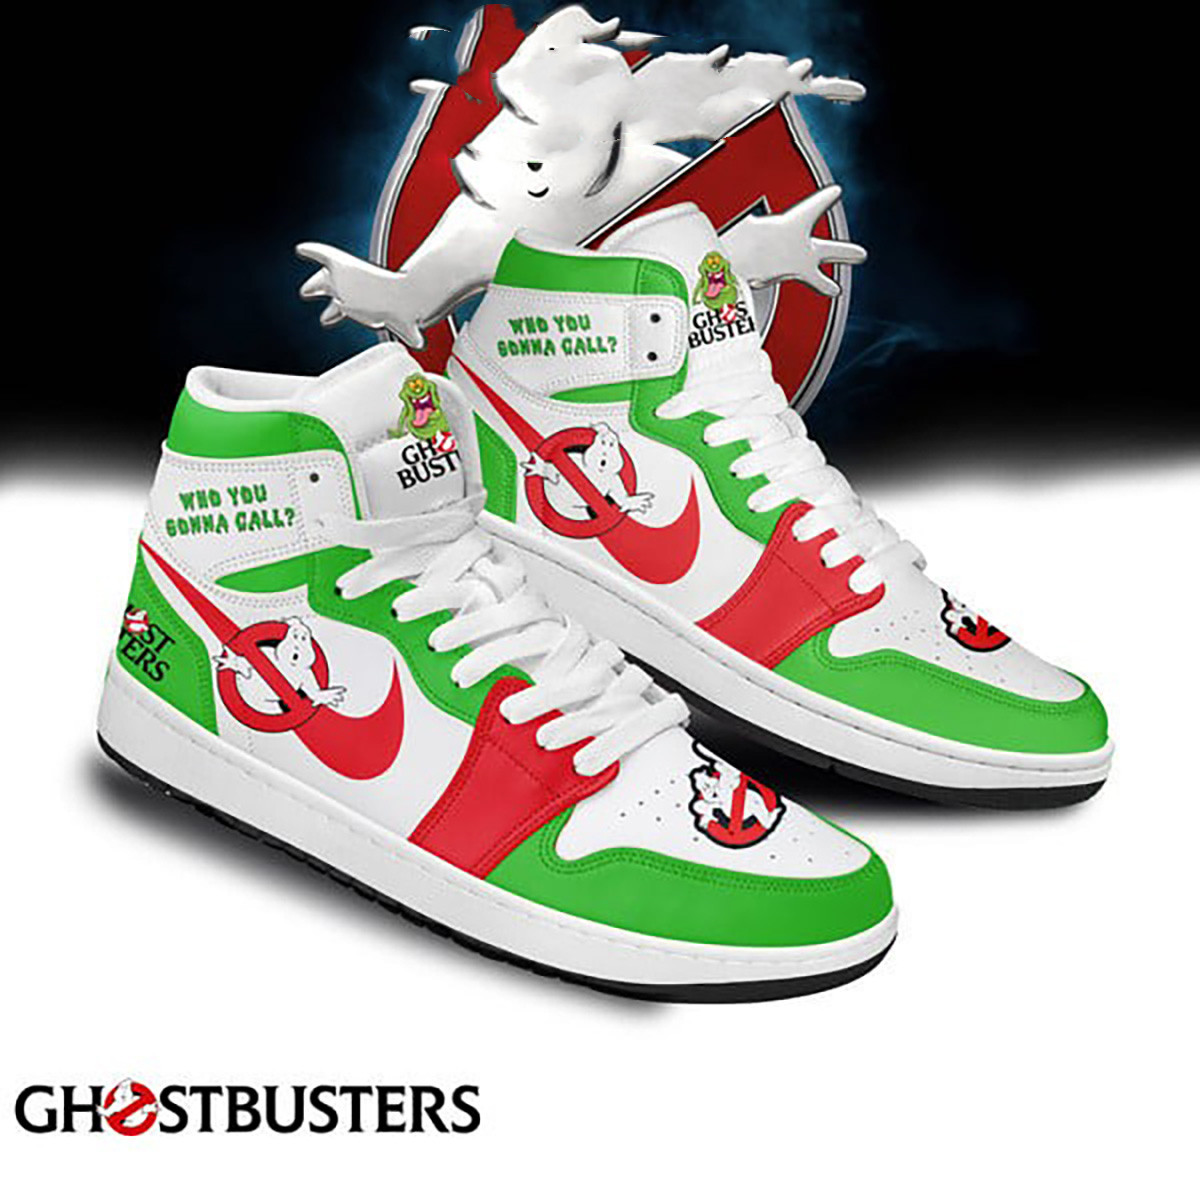 Sneakers - Ghostbusters Who You Gonna Call J1